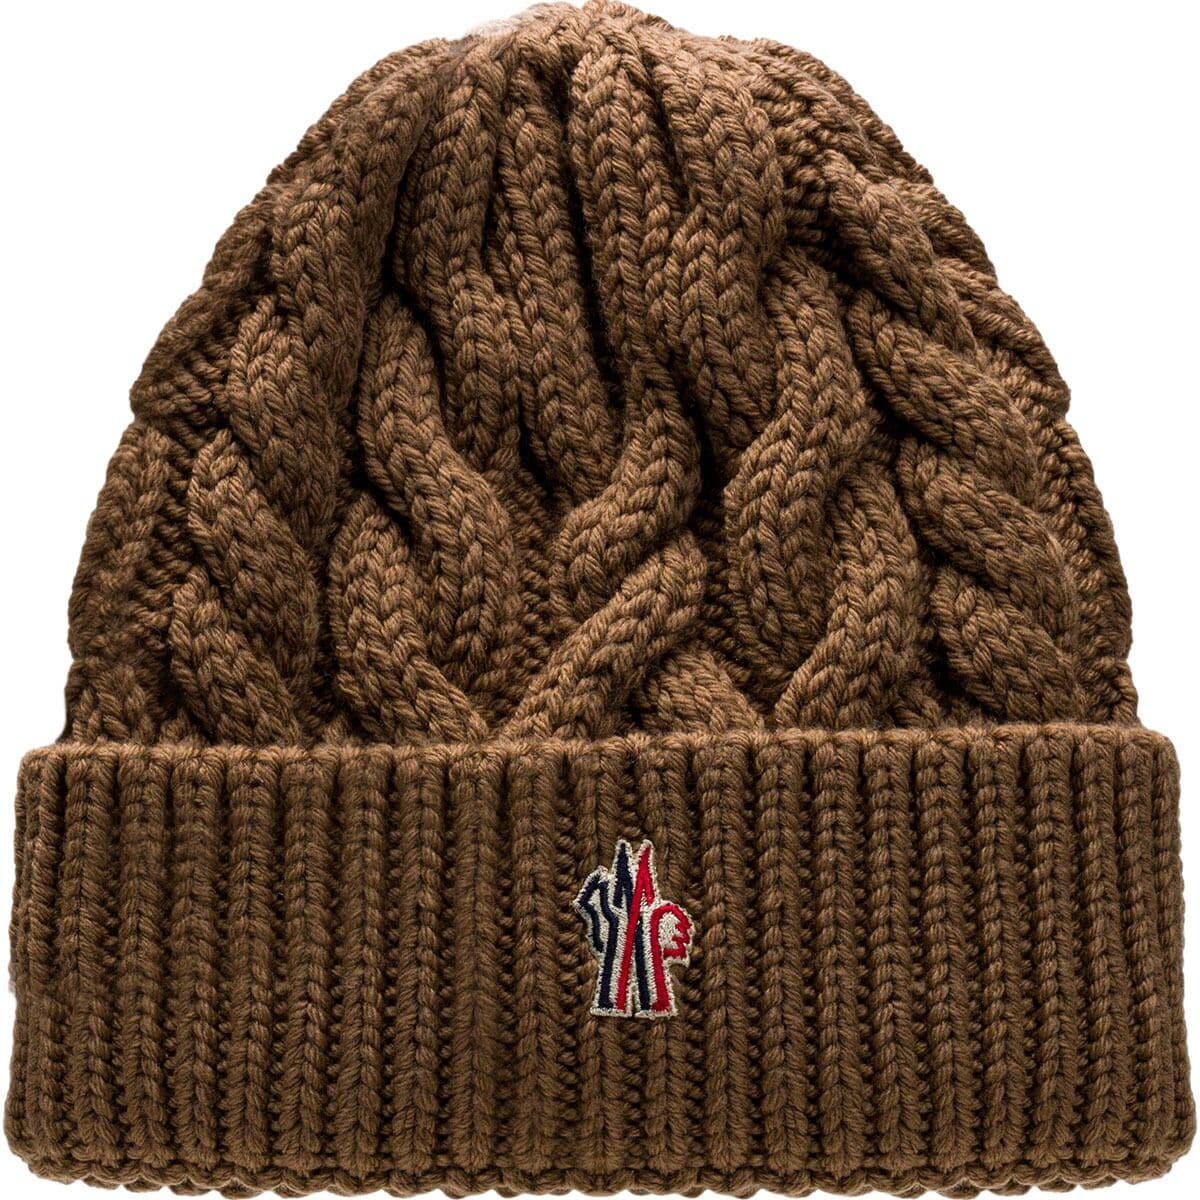 Moncler Grenoble Cable Knit Wool Beanie - Women's